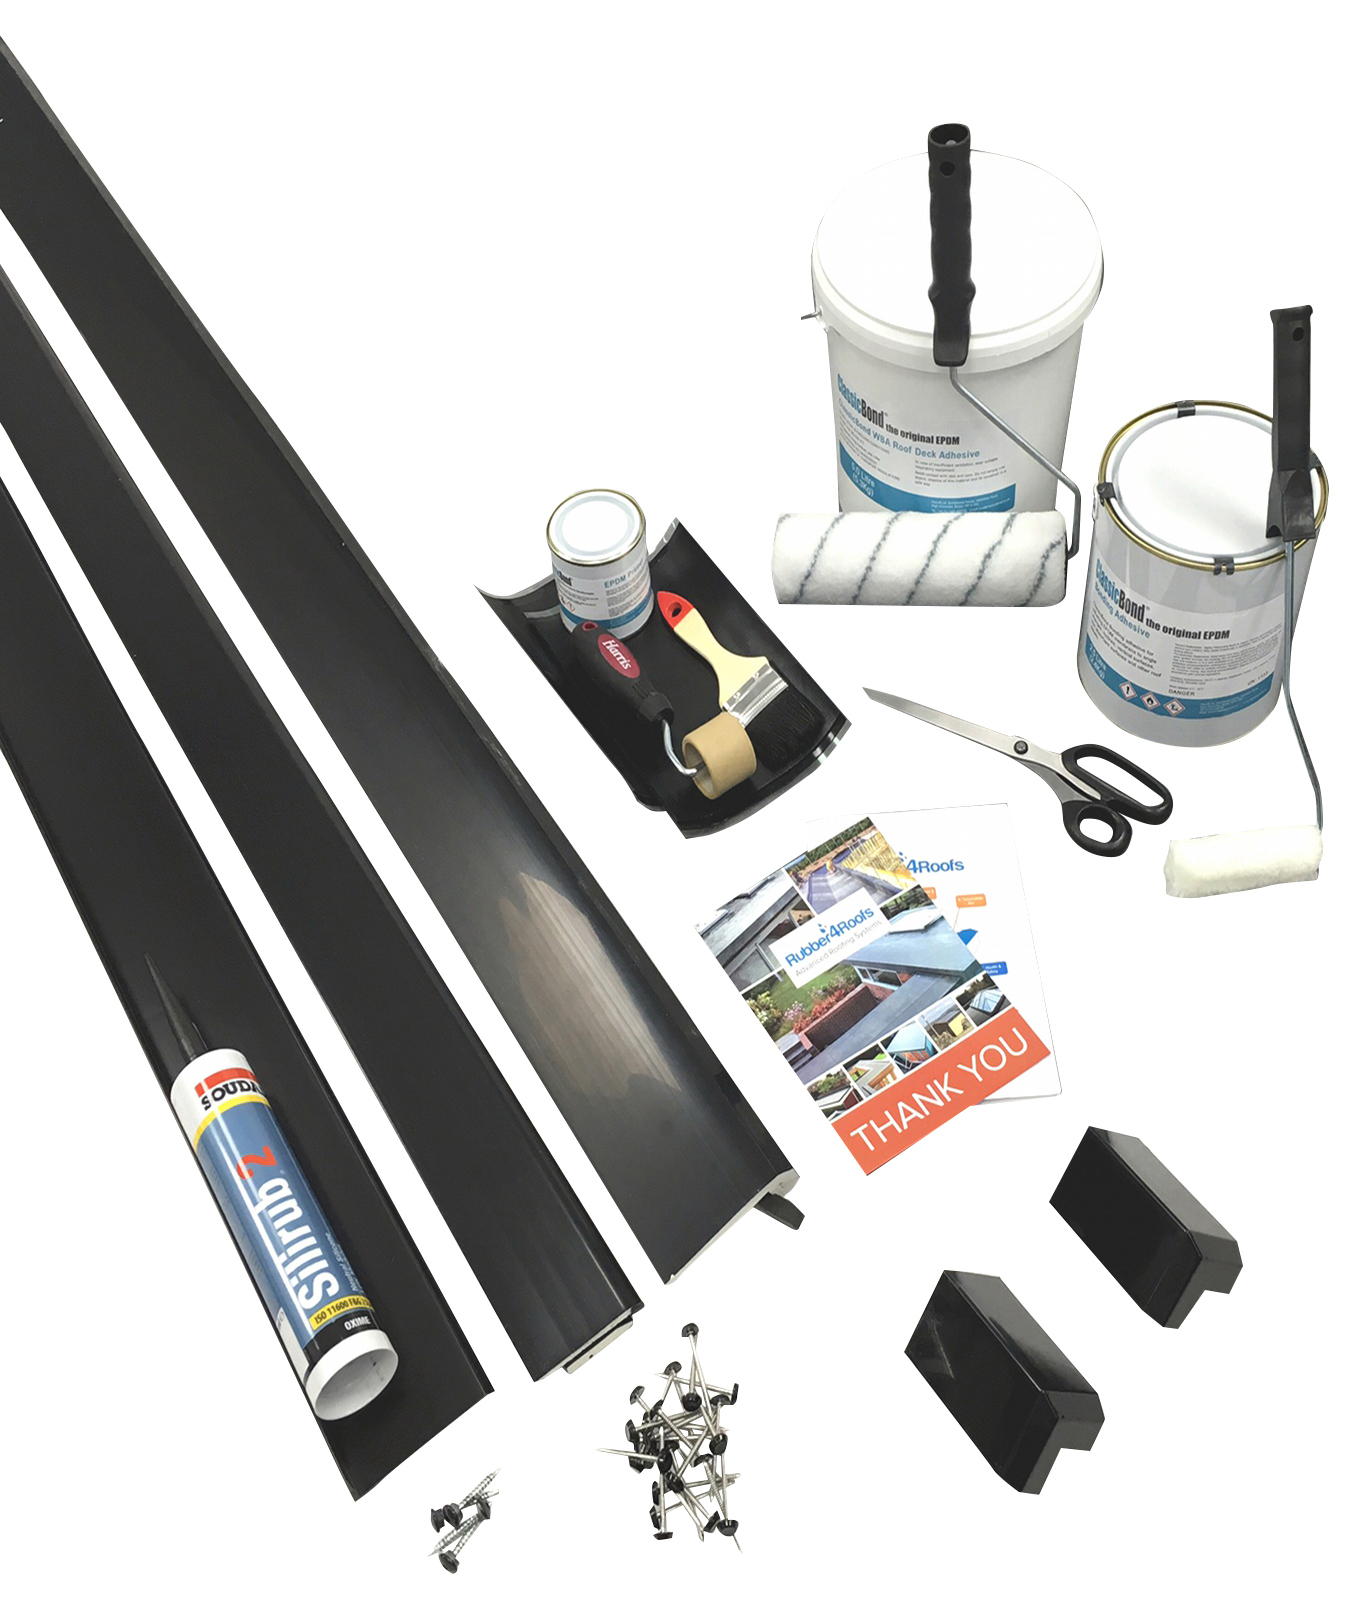 ClassicBond Porch Roof Kit with Black Trim